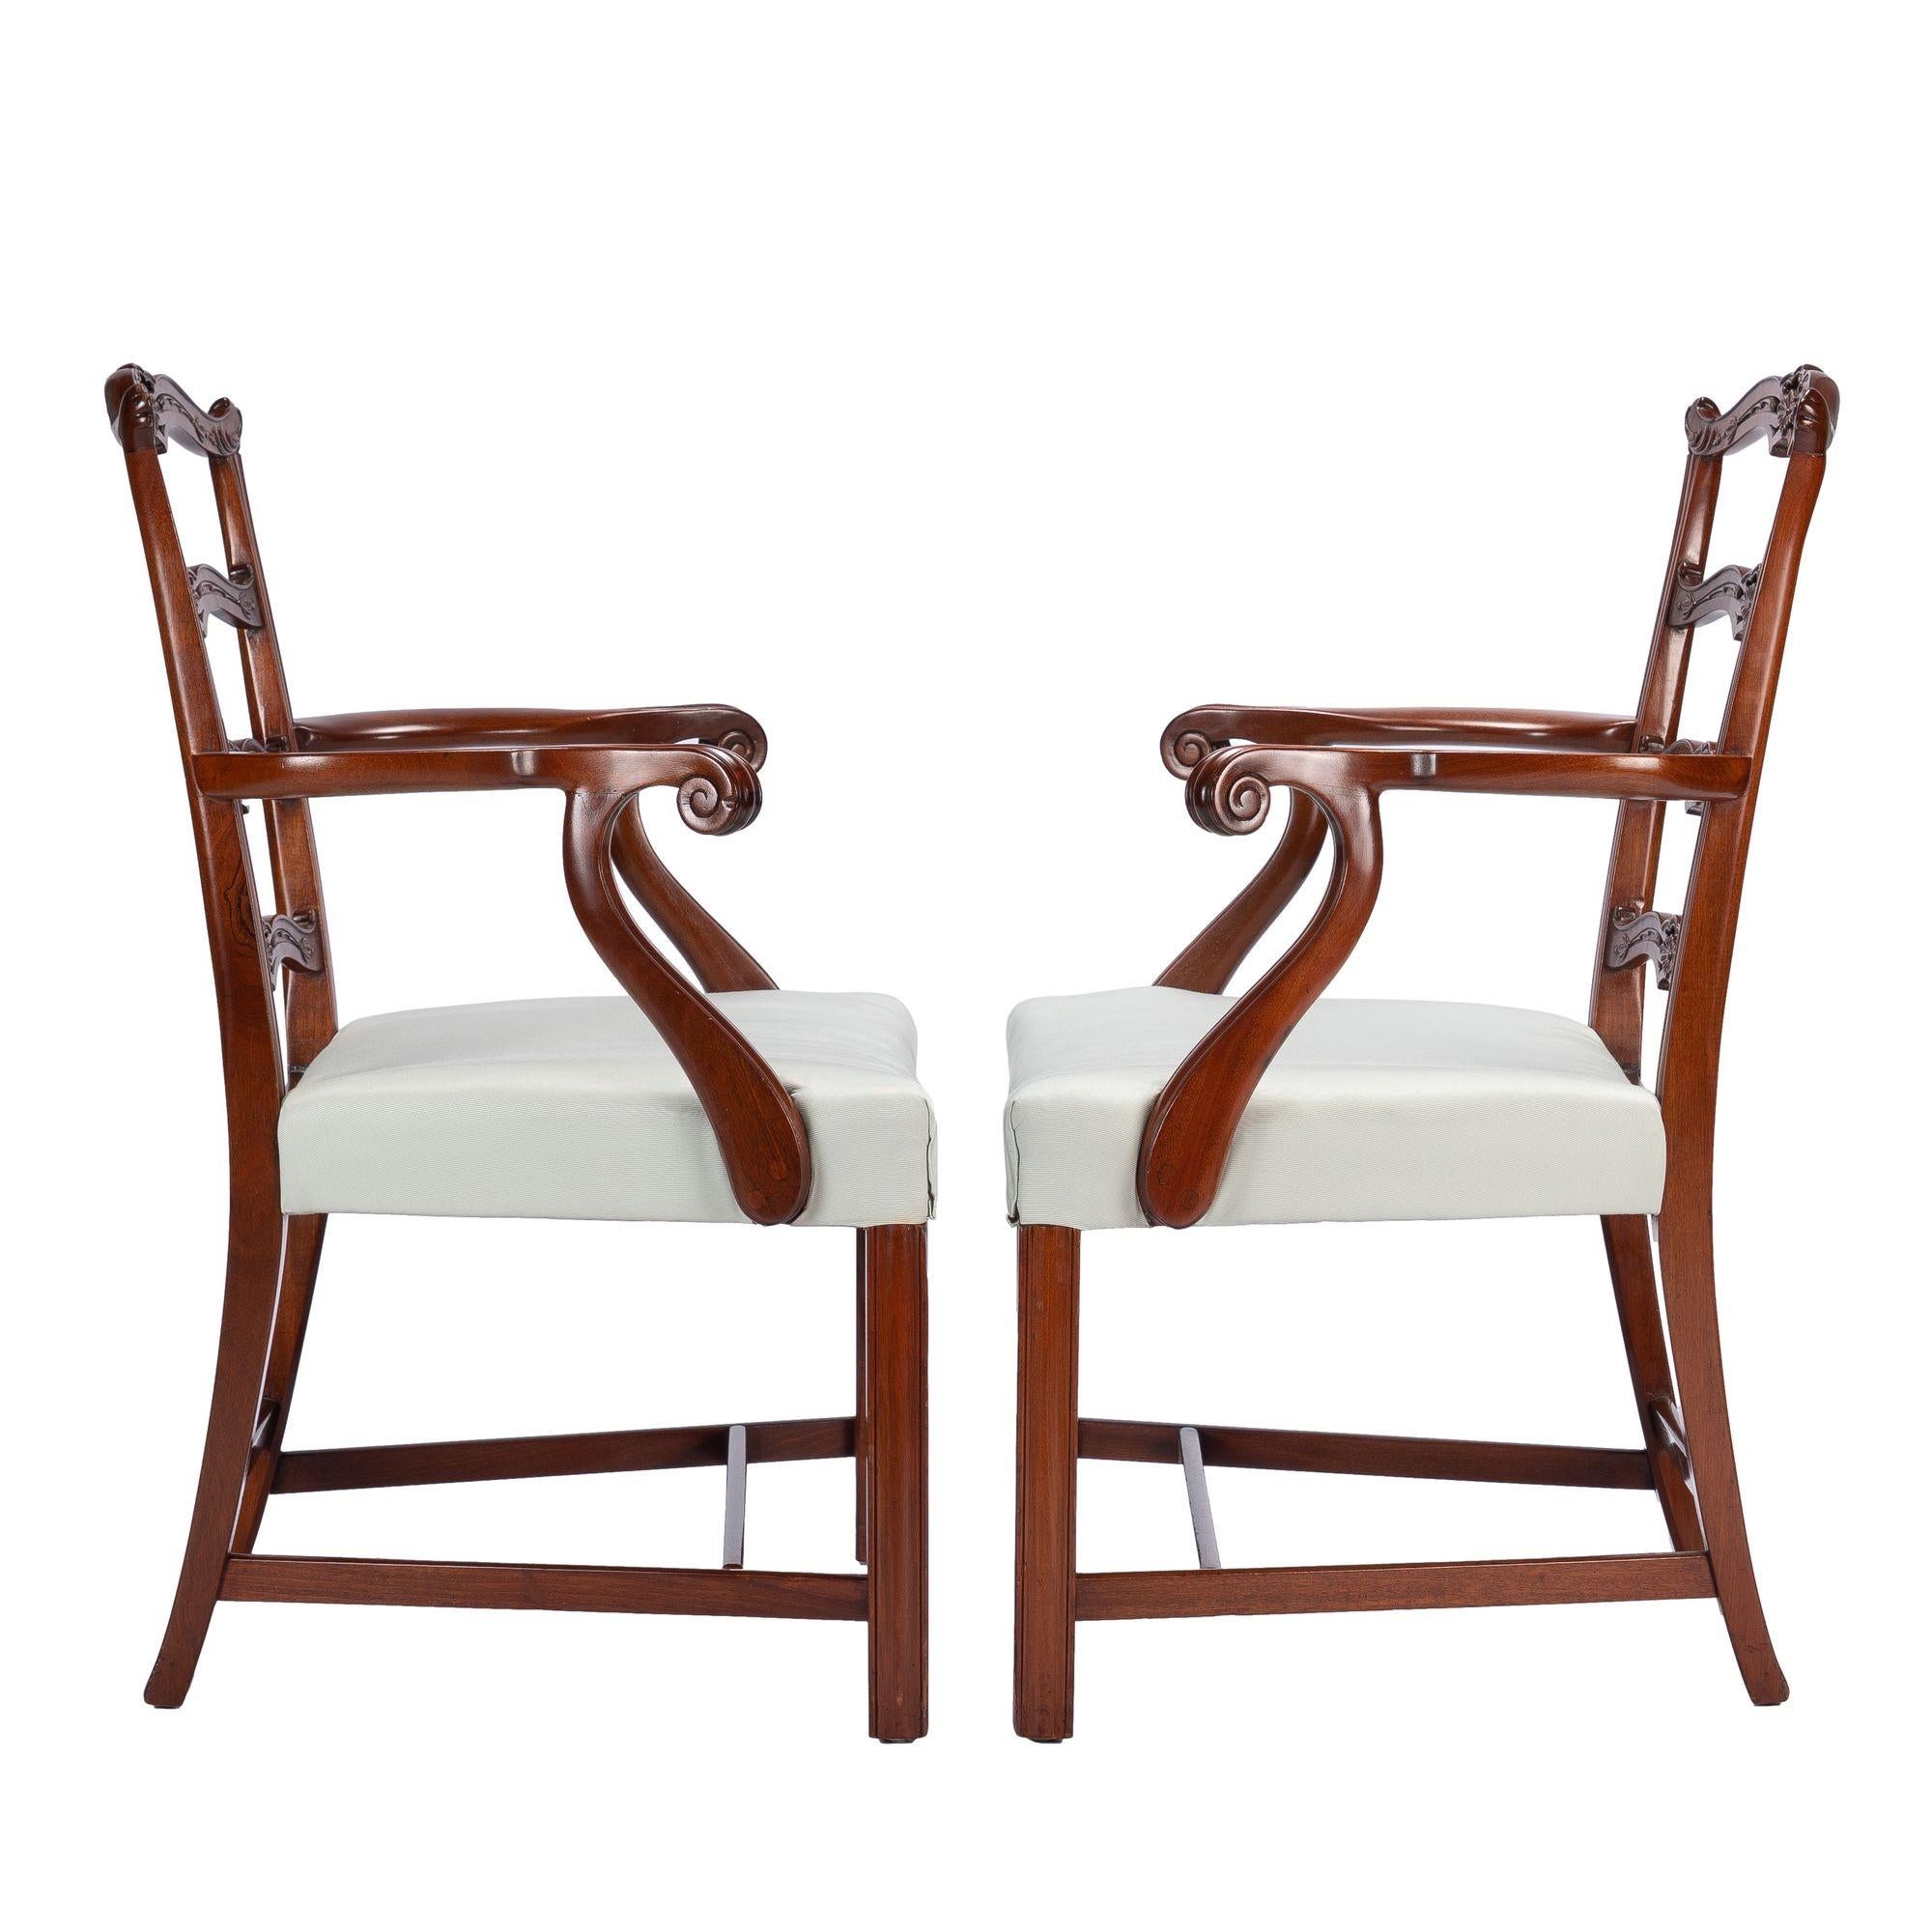 American Pair of Chippendale style ladder back arm chairs, c. 1930-40 For Sale